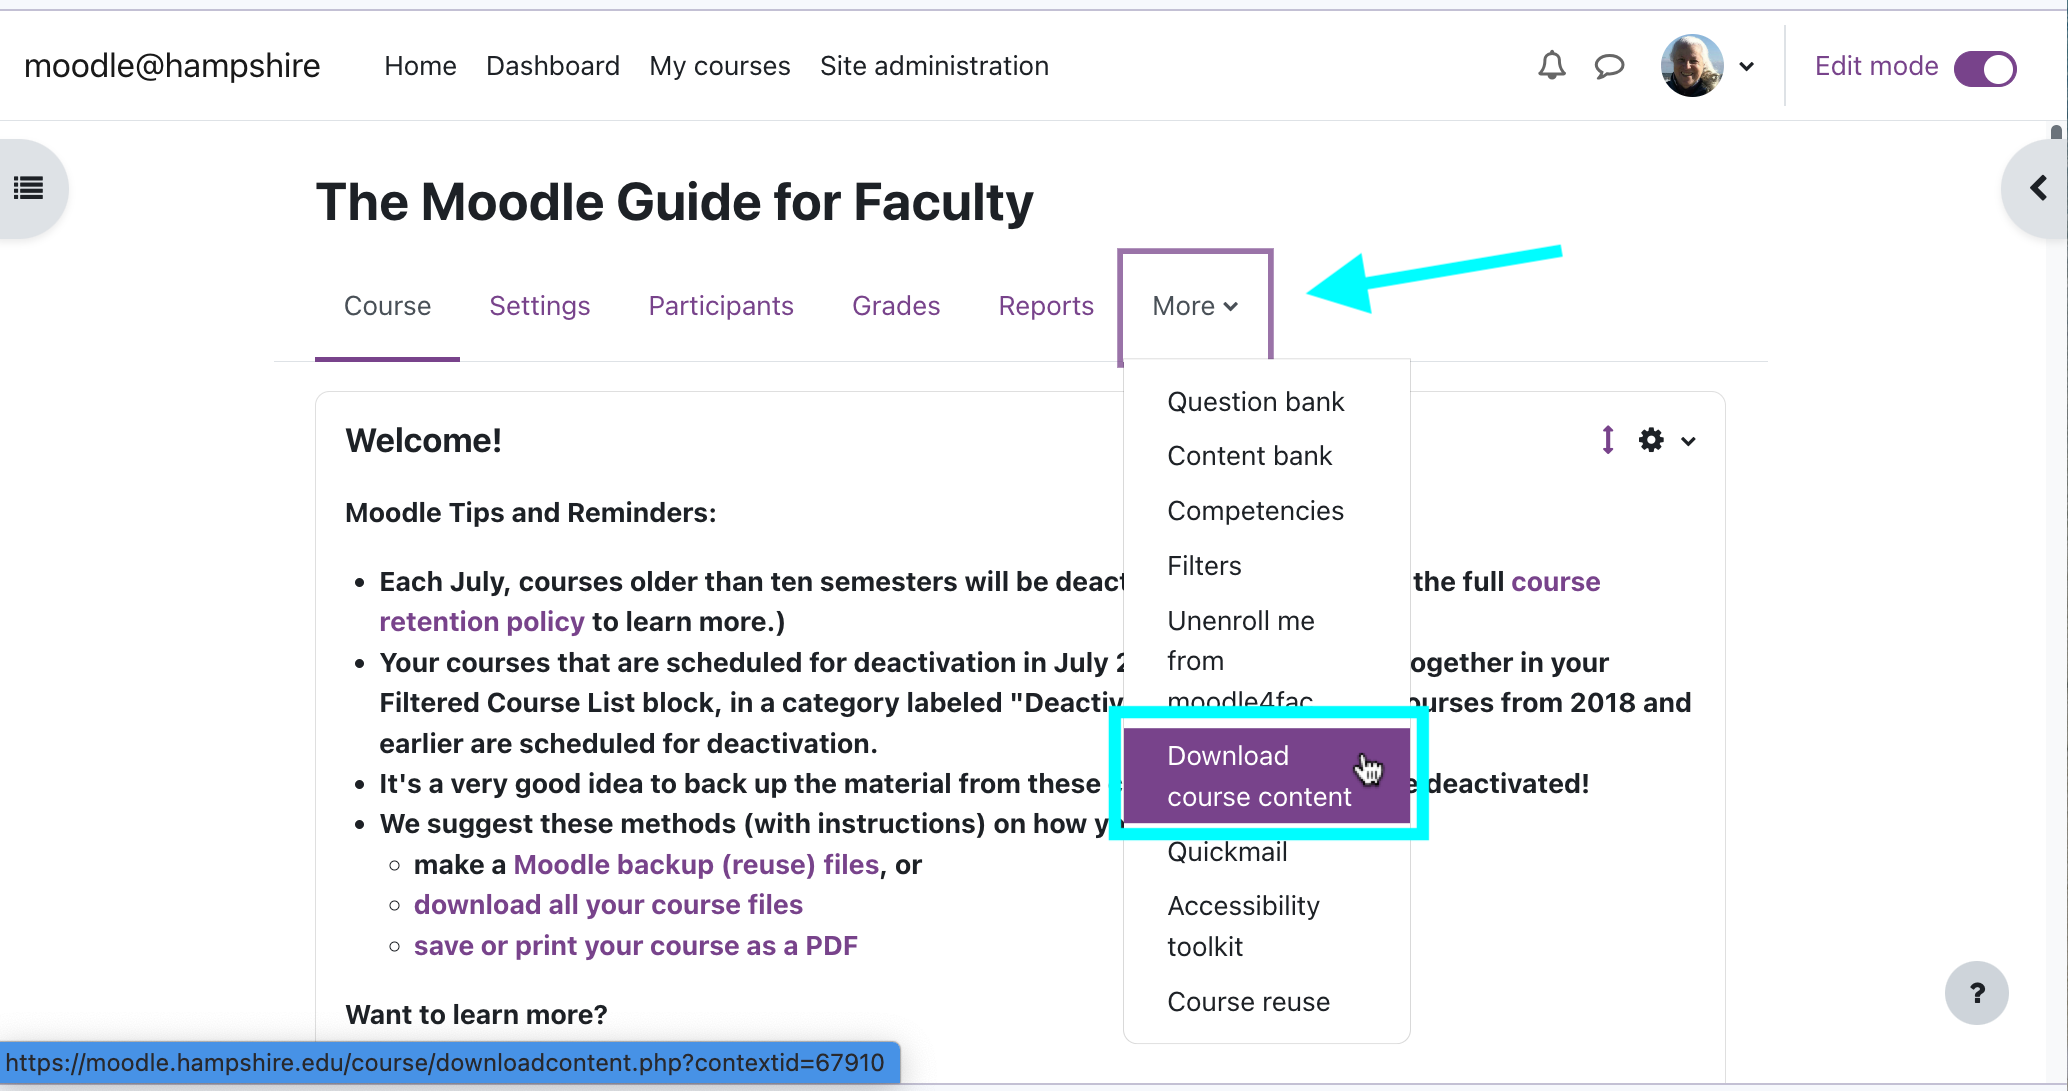 Download instructor Files link in administration block